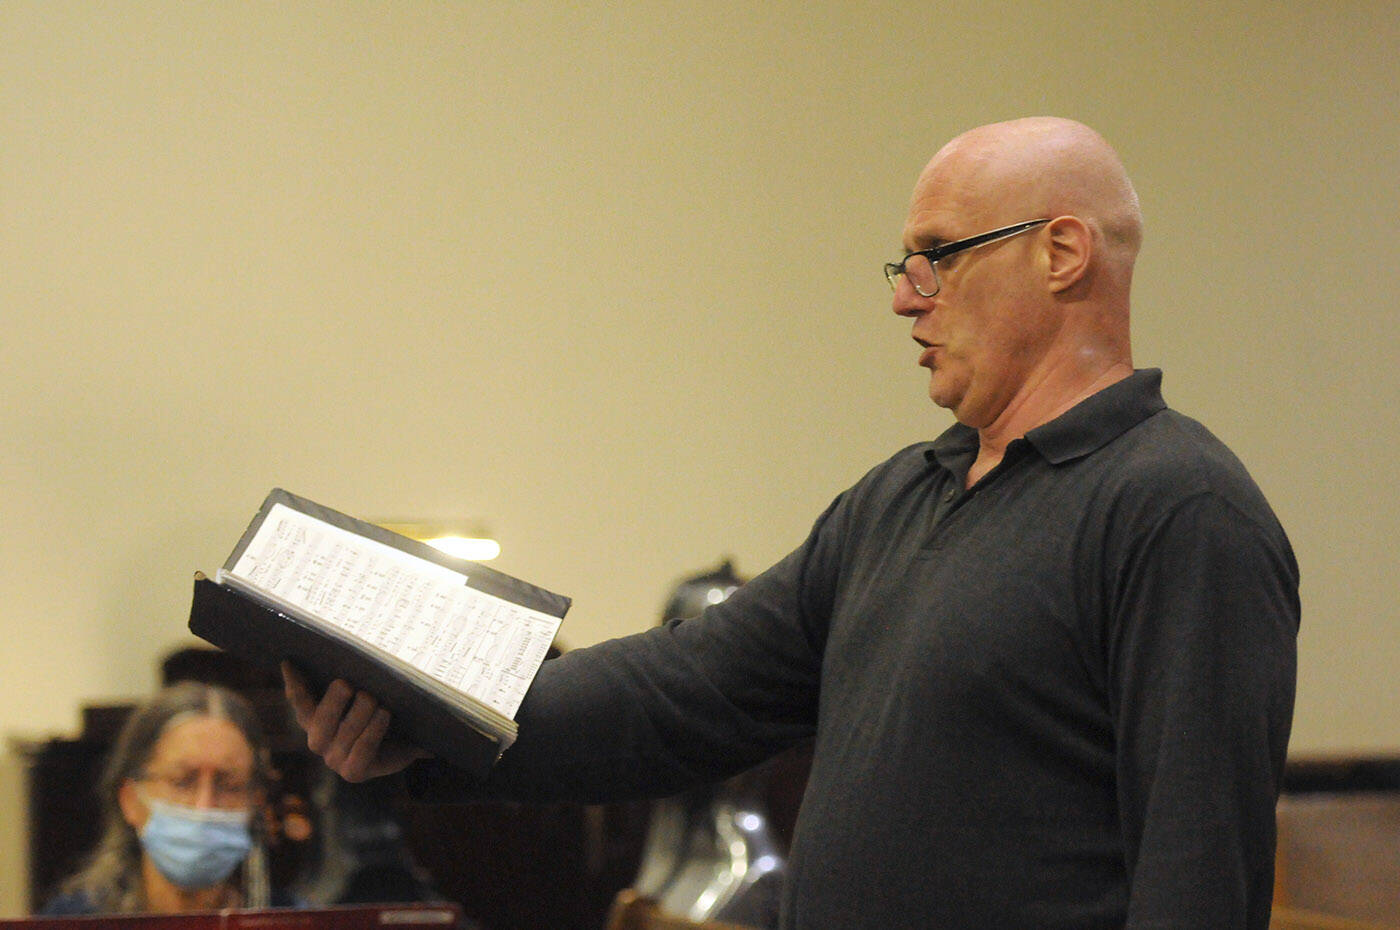 Vancouver baritone Andrew Greenwood will be joining the Chilliwack Metropolitan Orchestra for its spring concert on March 27. (Jenna Hauck/ Chilliwack Progress)